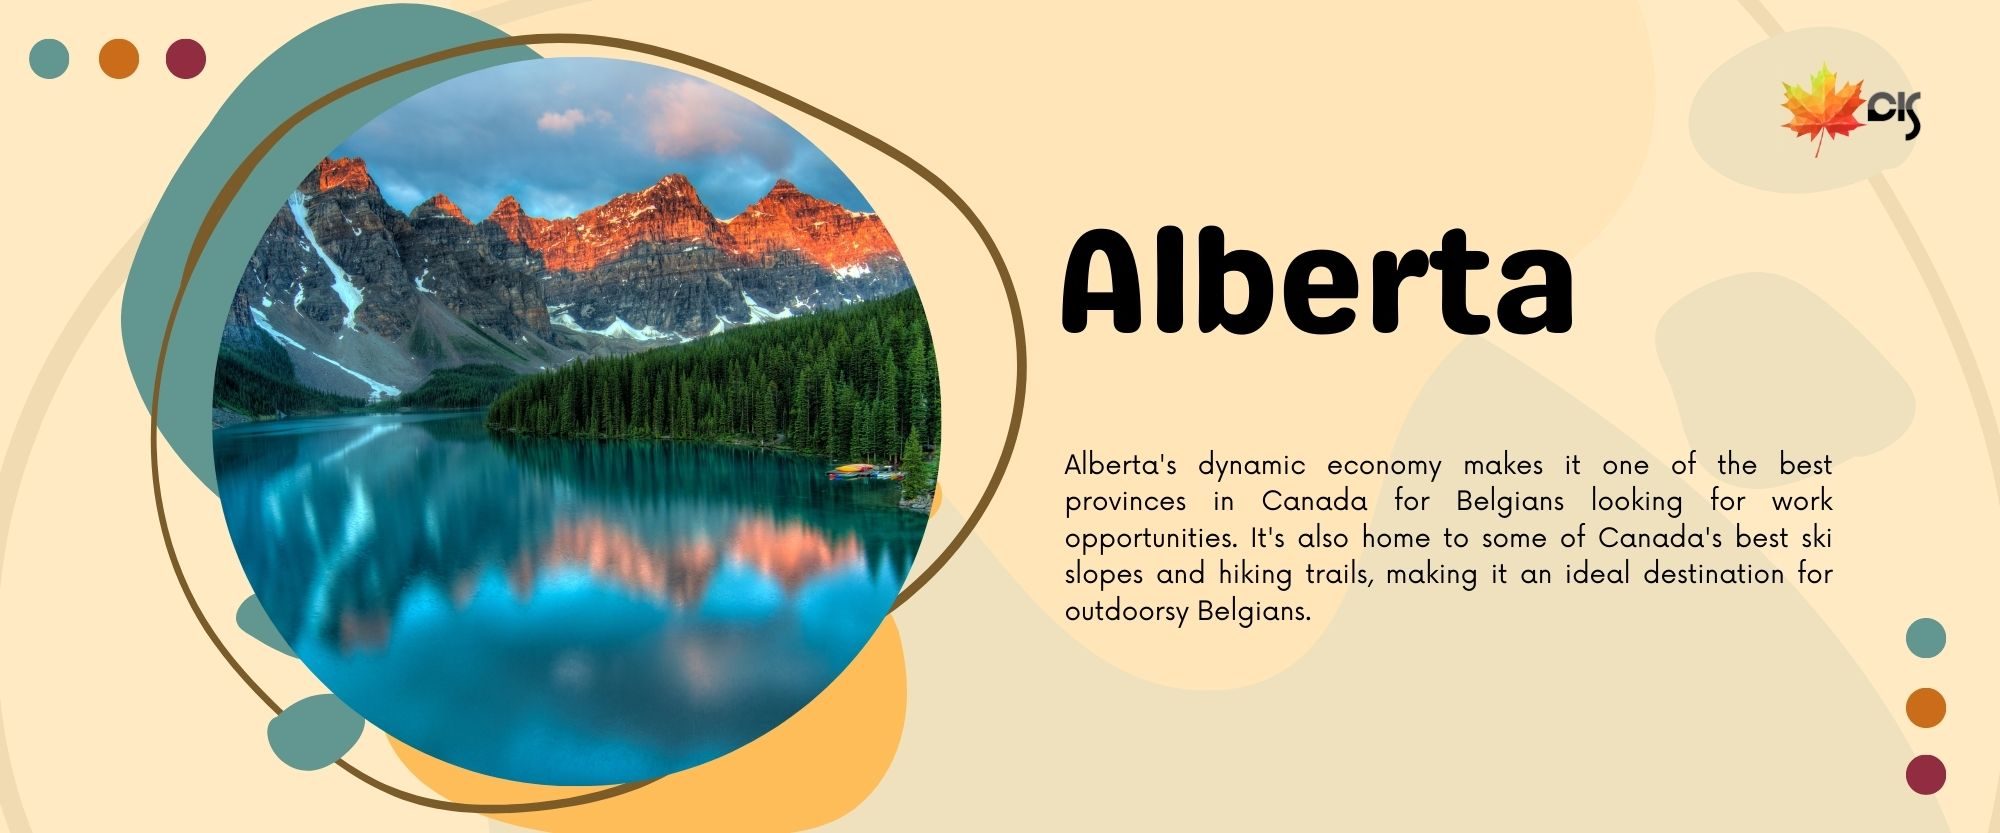 Alberta's dynamic economy makes it one of the best provinces in Canada for Belgians looking for work opportunities. It's also home to some of Canada's best ski slopes and hiking trails, making it an ideal destination for outdoorsy Belgians.